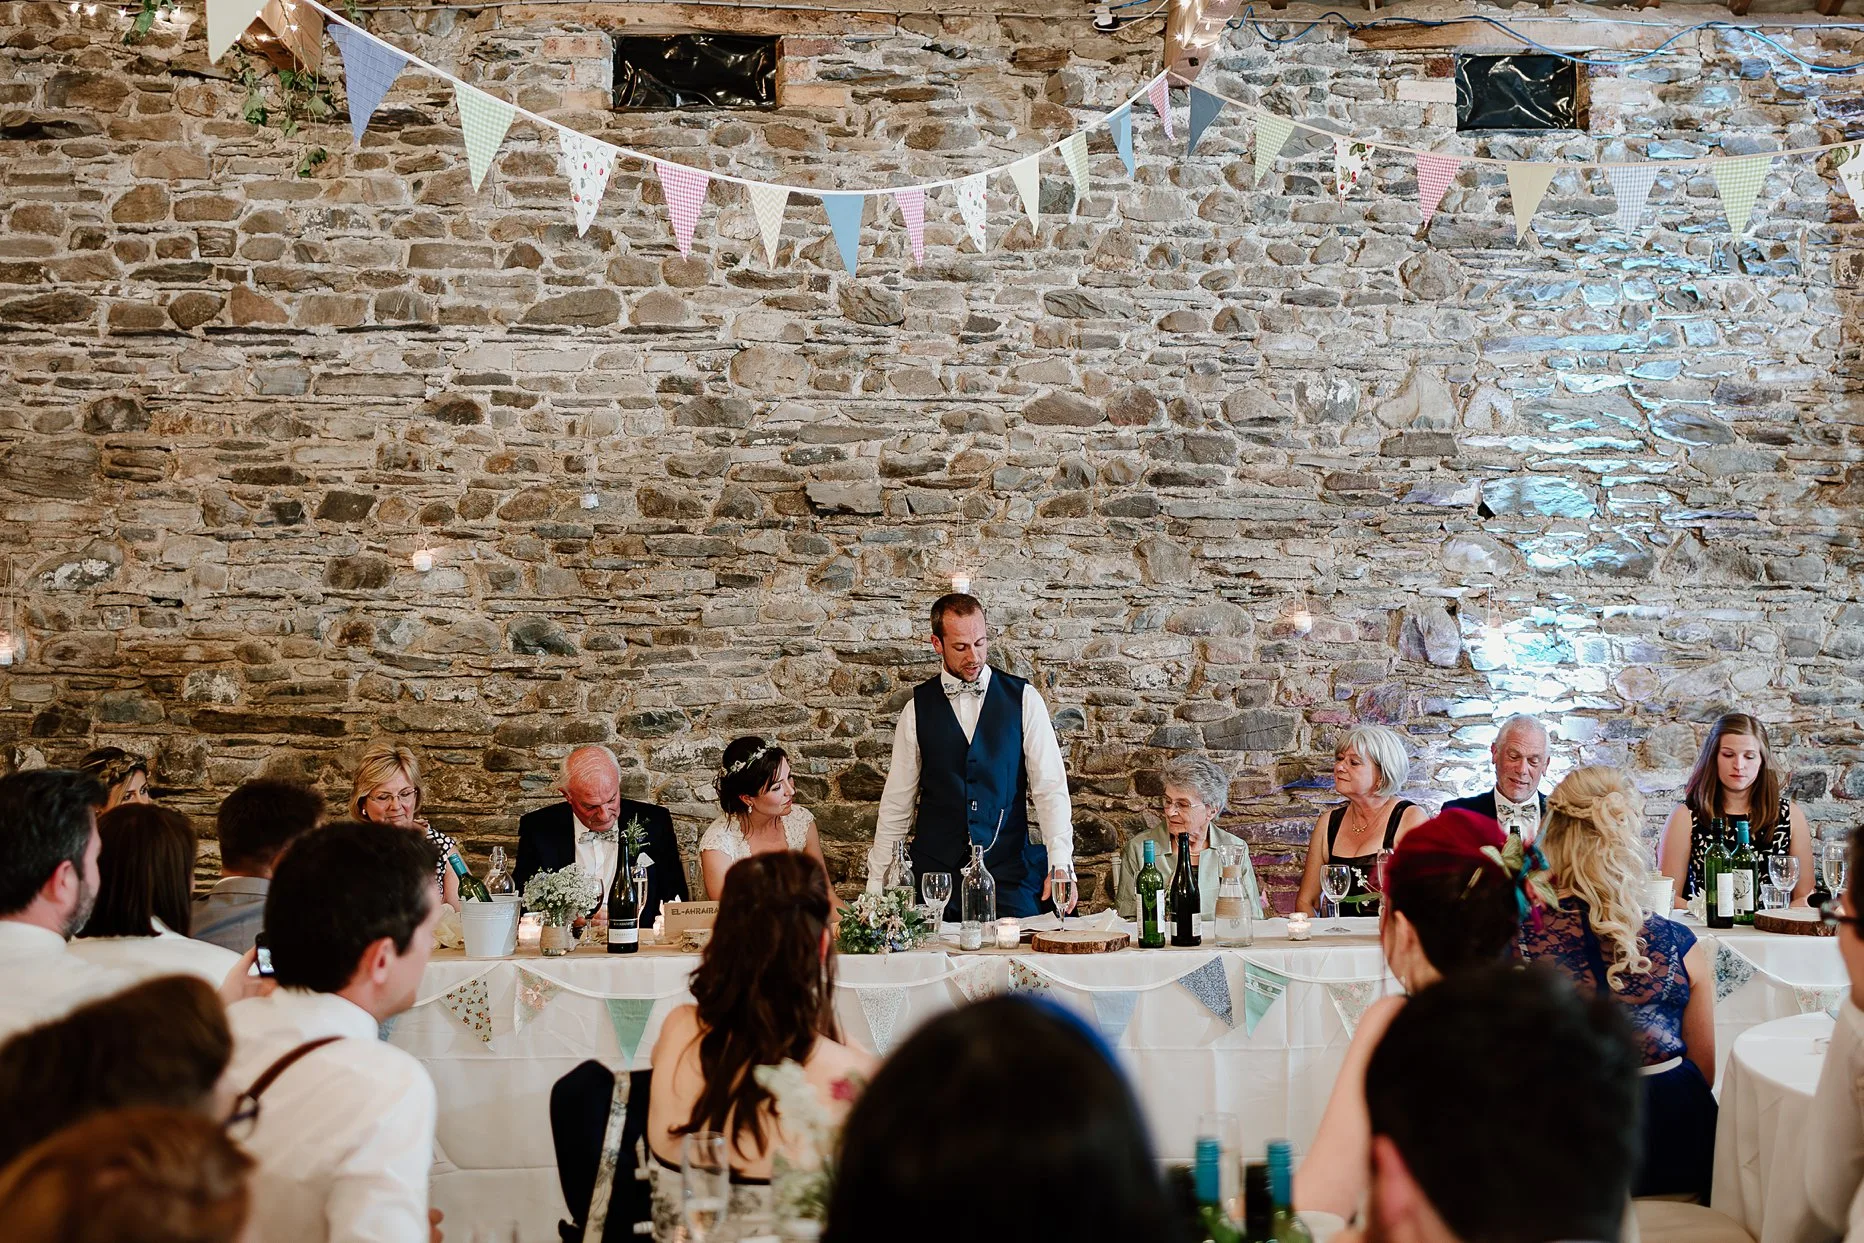 Groom making his wedding speech surrounded by family. He is stood up at a long table in a wedding barn.